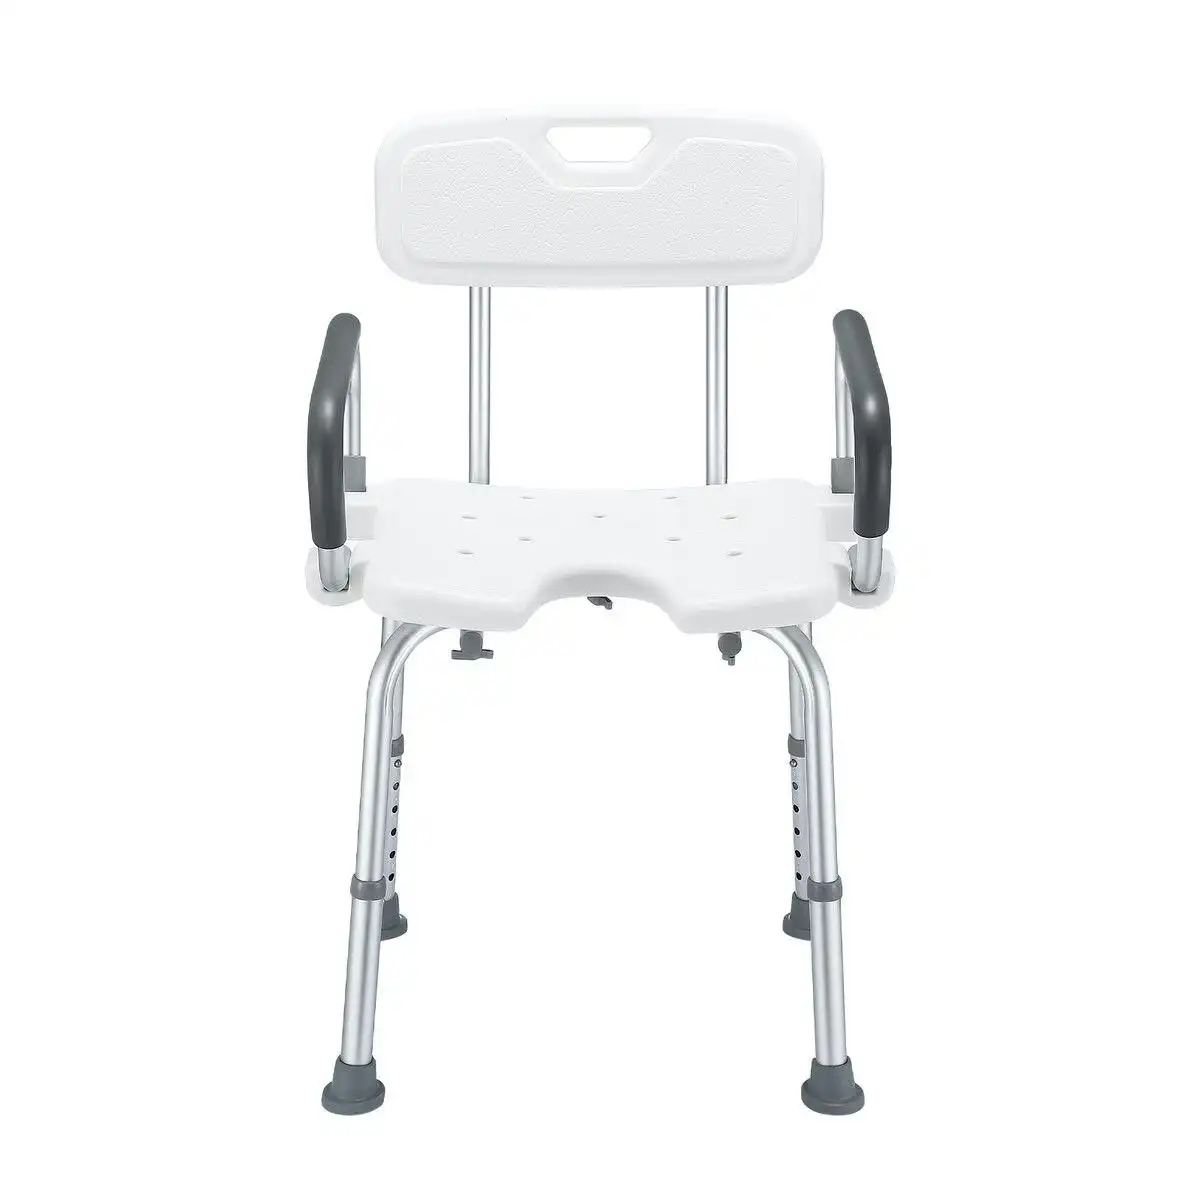 Ausway Shower Chair Seat Bath Stool Adjustable Bathroom Furniture Bathtub Seating Bench for Elderly Disabled with Arms